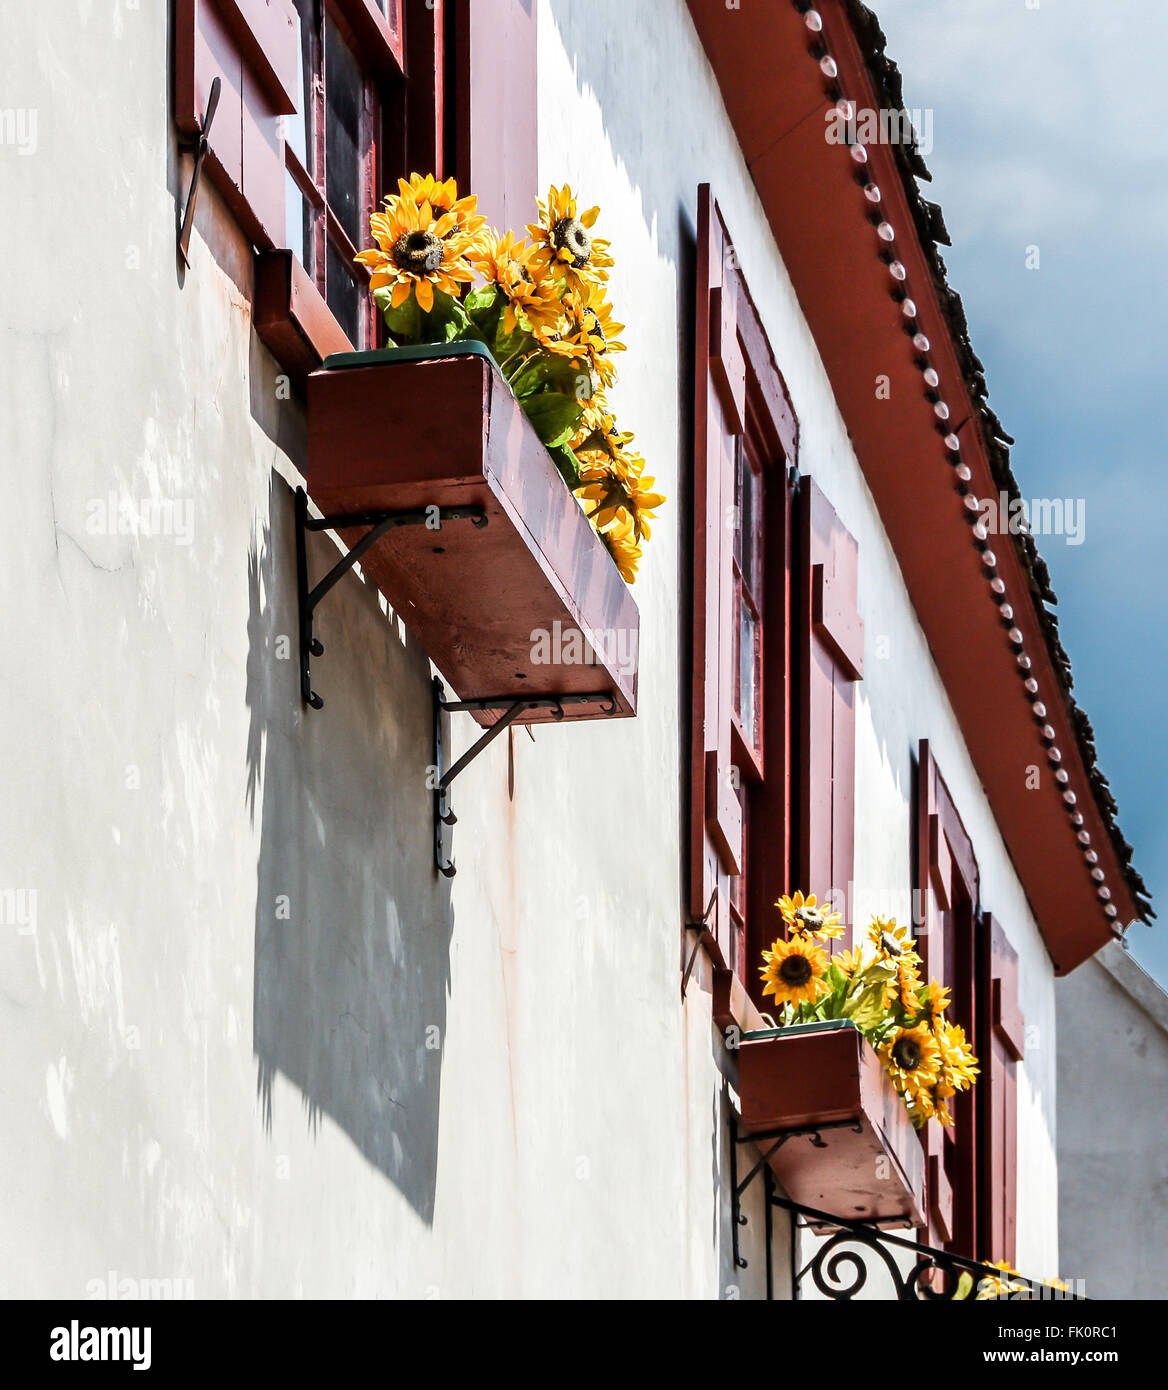 Flowerboxes in three windows with yellow flowers Stock Photo